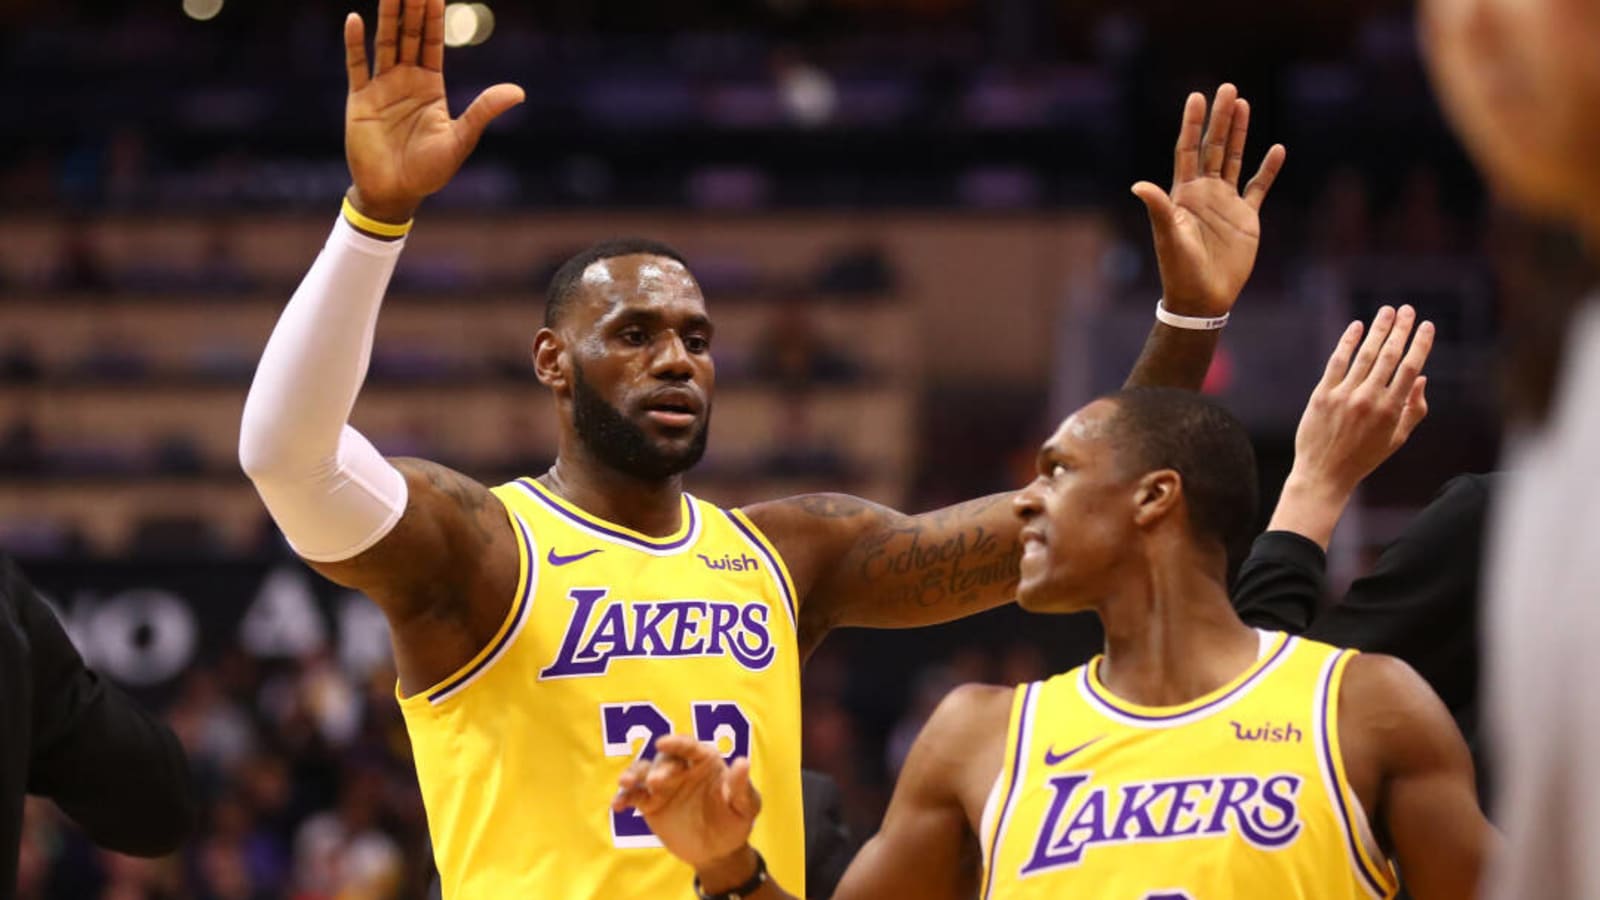 LeBron James Opens Up On Rajon Rondo's Retirement: 'One Of The Best Players I Ever Played With'